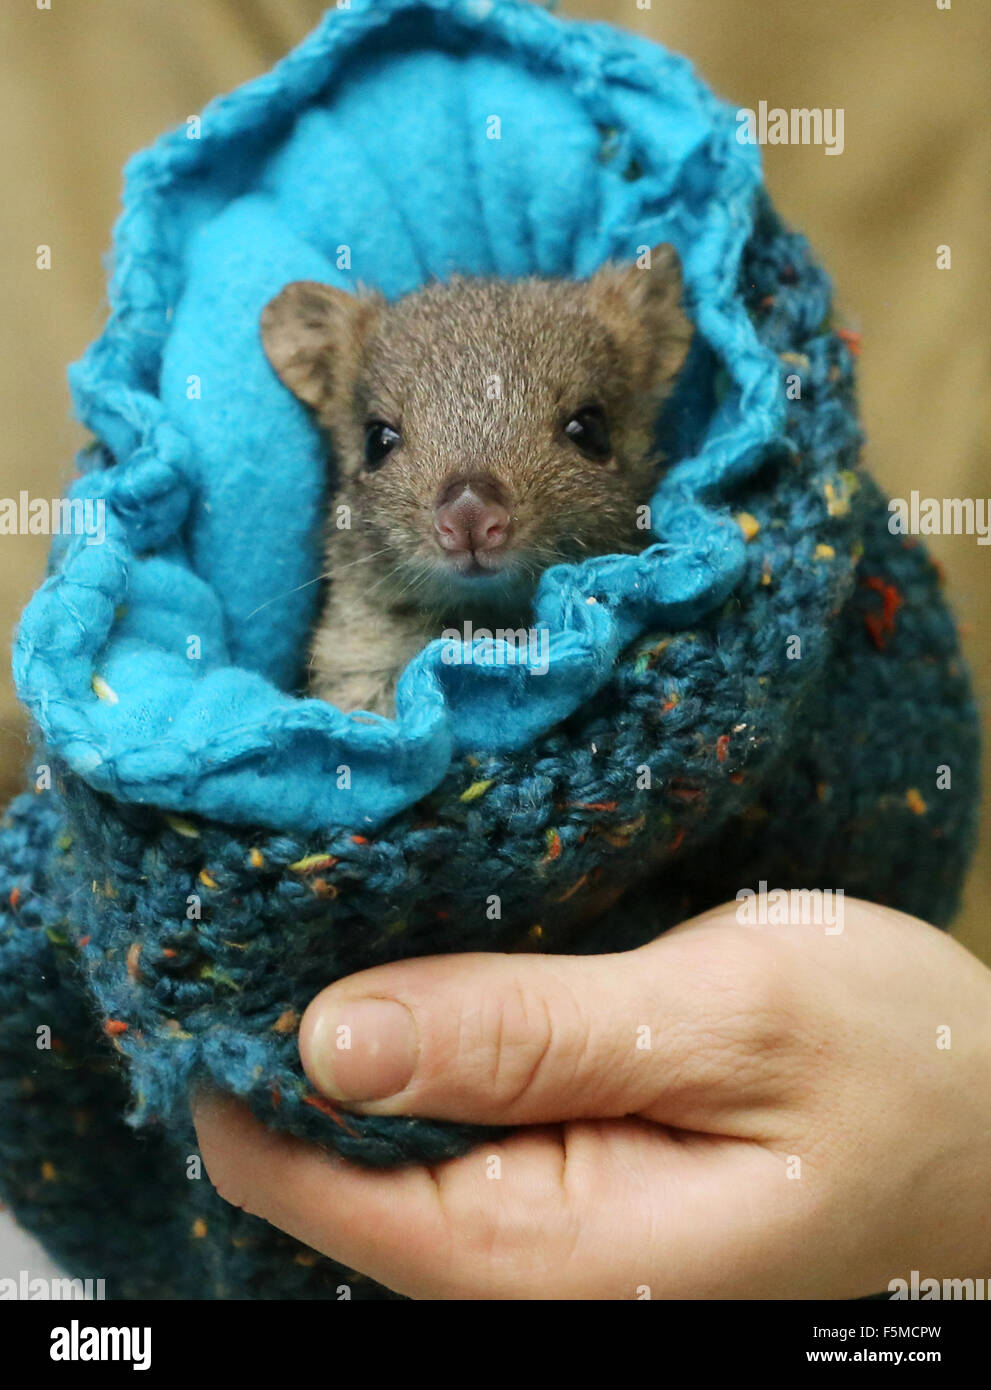 Duisburg, Germany. 6th Nov, 2015. Four-month old Lucy the baby rat-kangaroo in a knitted pouch, at the zoo in Duisburg, Germany, 6 November 2015. Lucy is being raised by keepers because her mother is died. PHOTO: ROLAND WEIHRAUCH/DPA/Alamy Live News Stock Photo